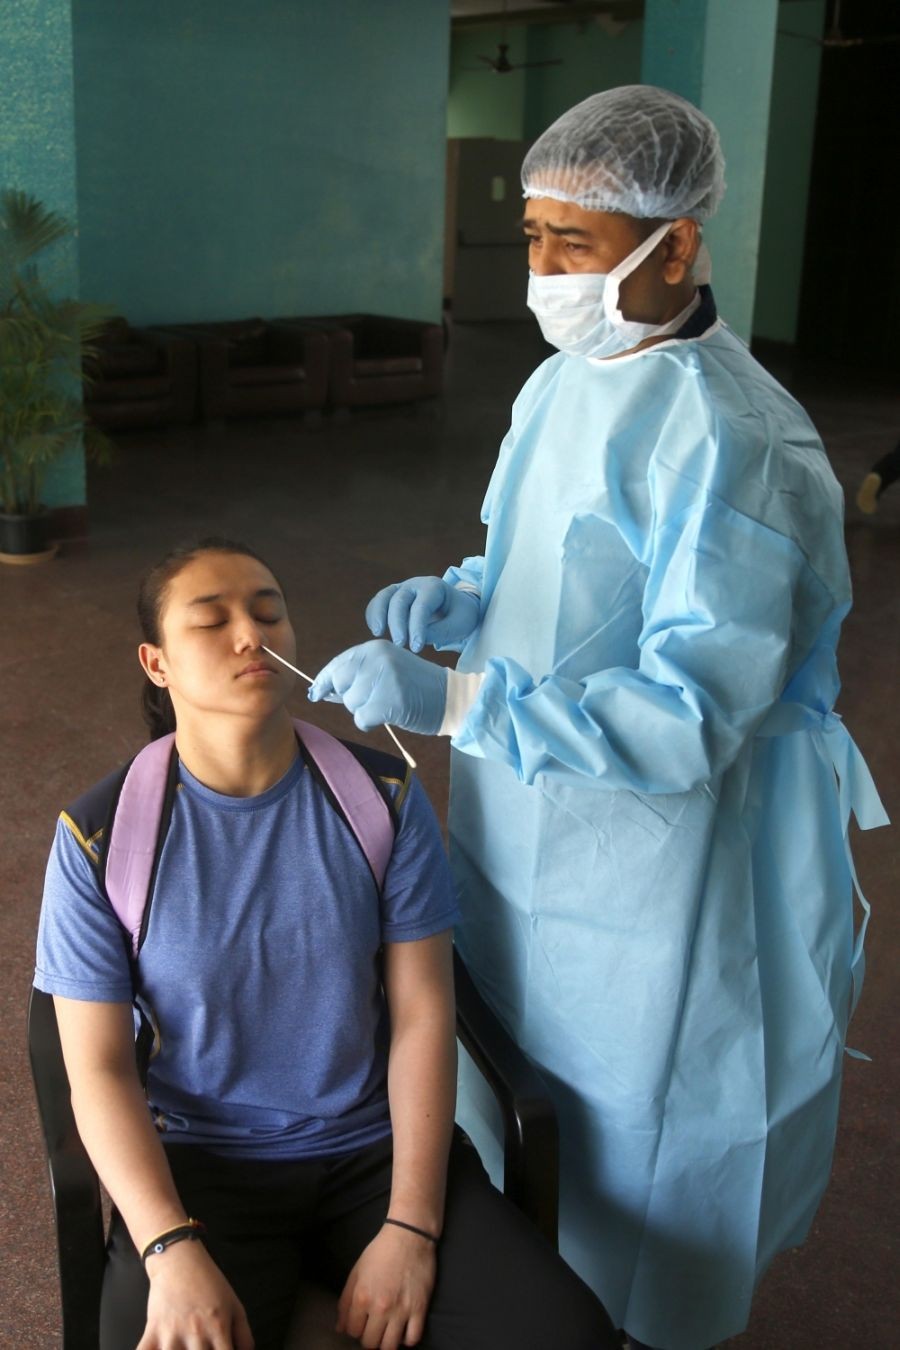 New Delhi: A health worker collects a nasal sample from a sports woman for the RT-PCR test of Covid-19 at the hostel of Indira Gandhi Indoor stadium in New Delhi on Thursday, May 05, 2022. (Photo: Qamar Sibtain/IANS)